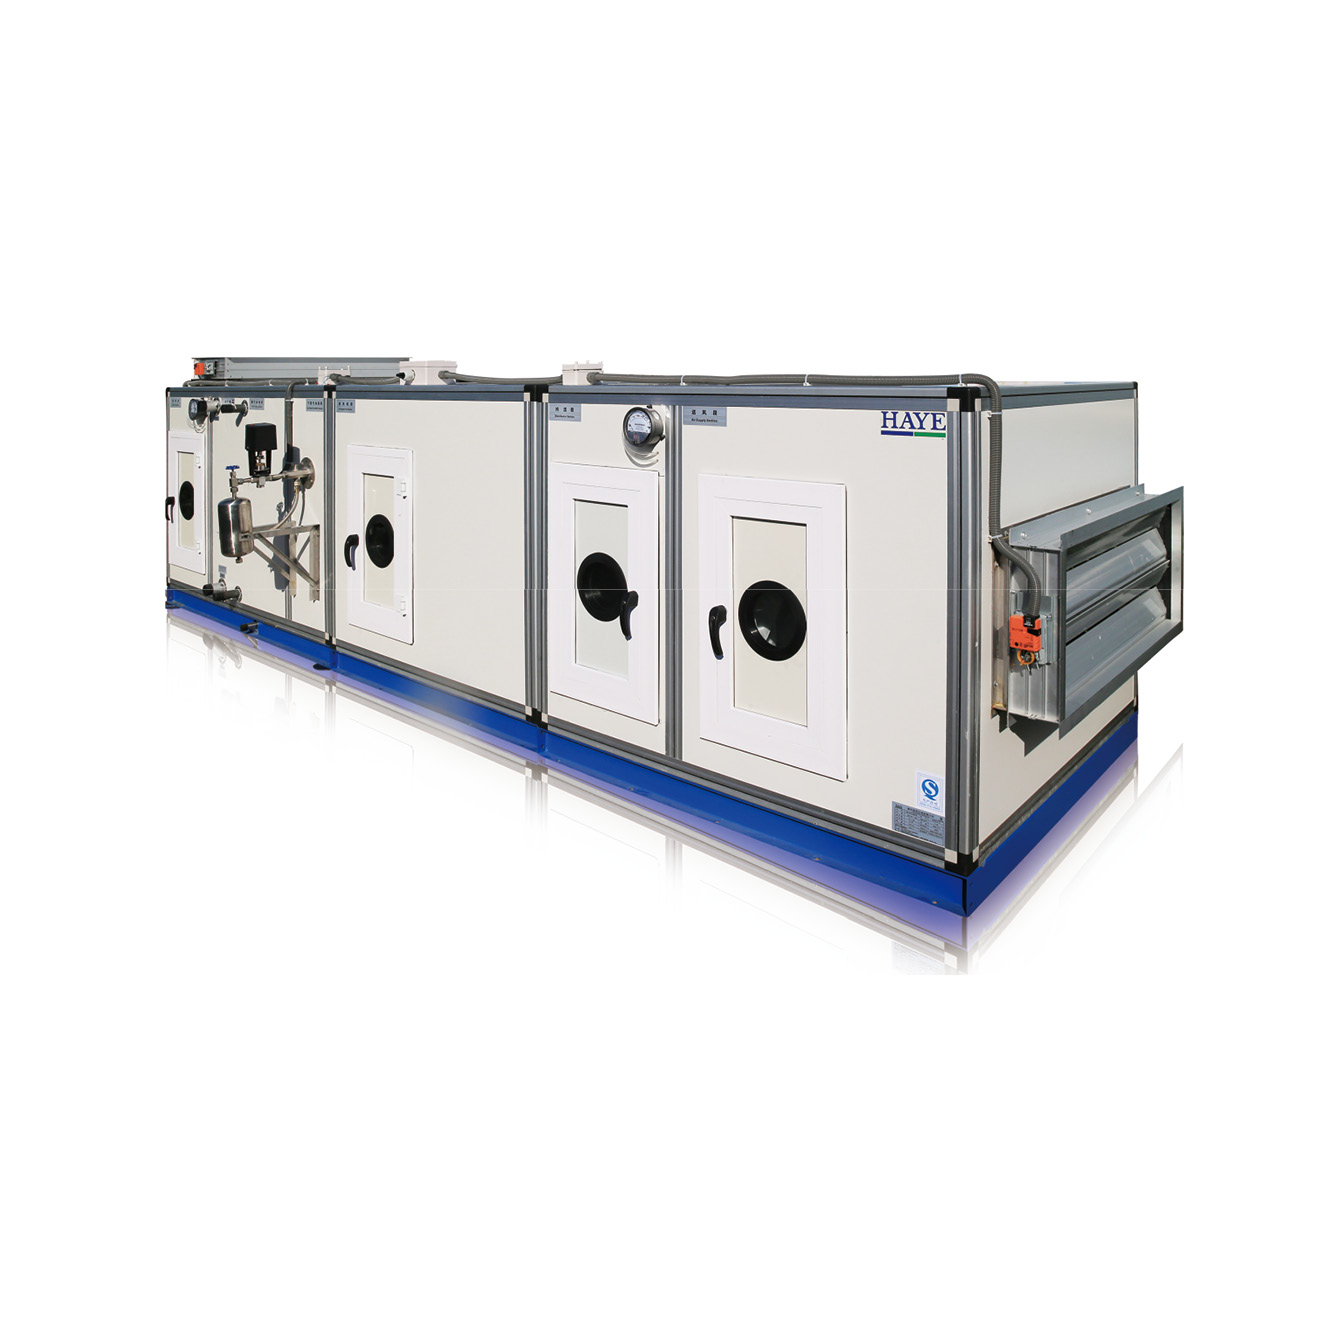 Combined air handling unit